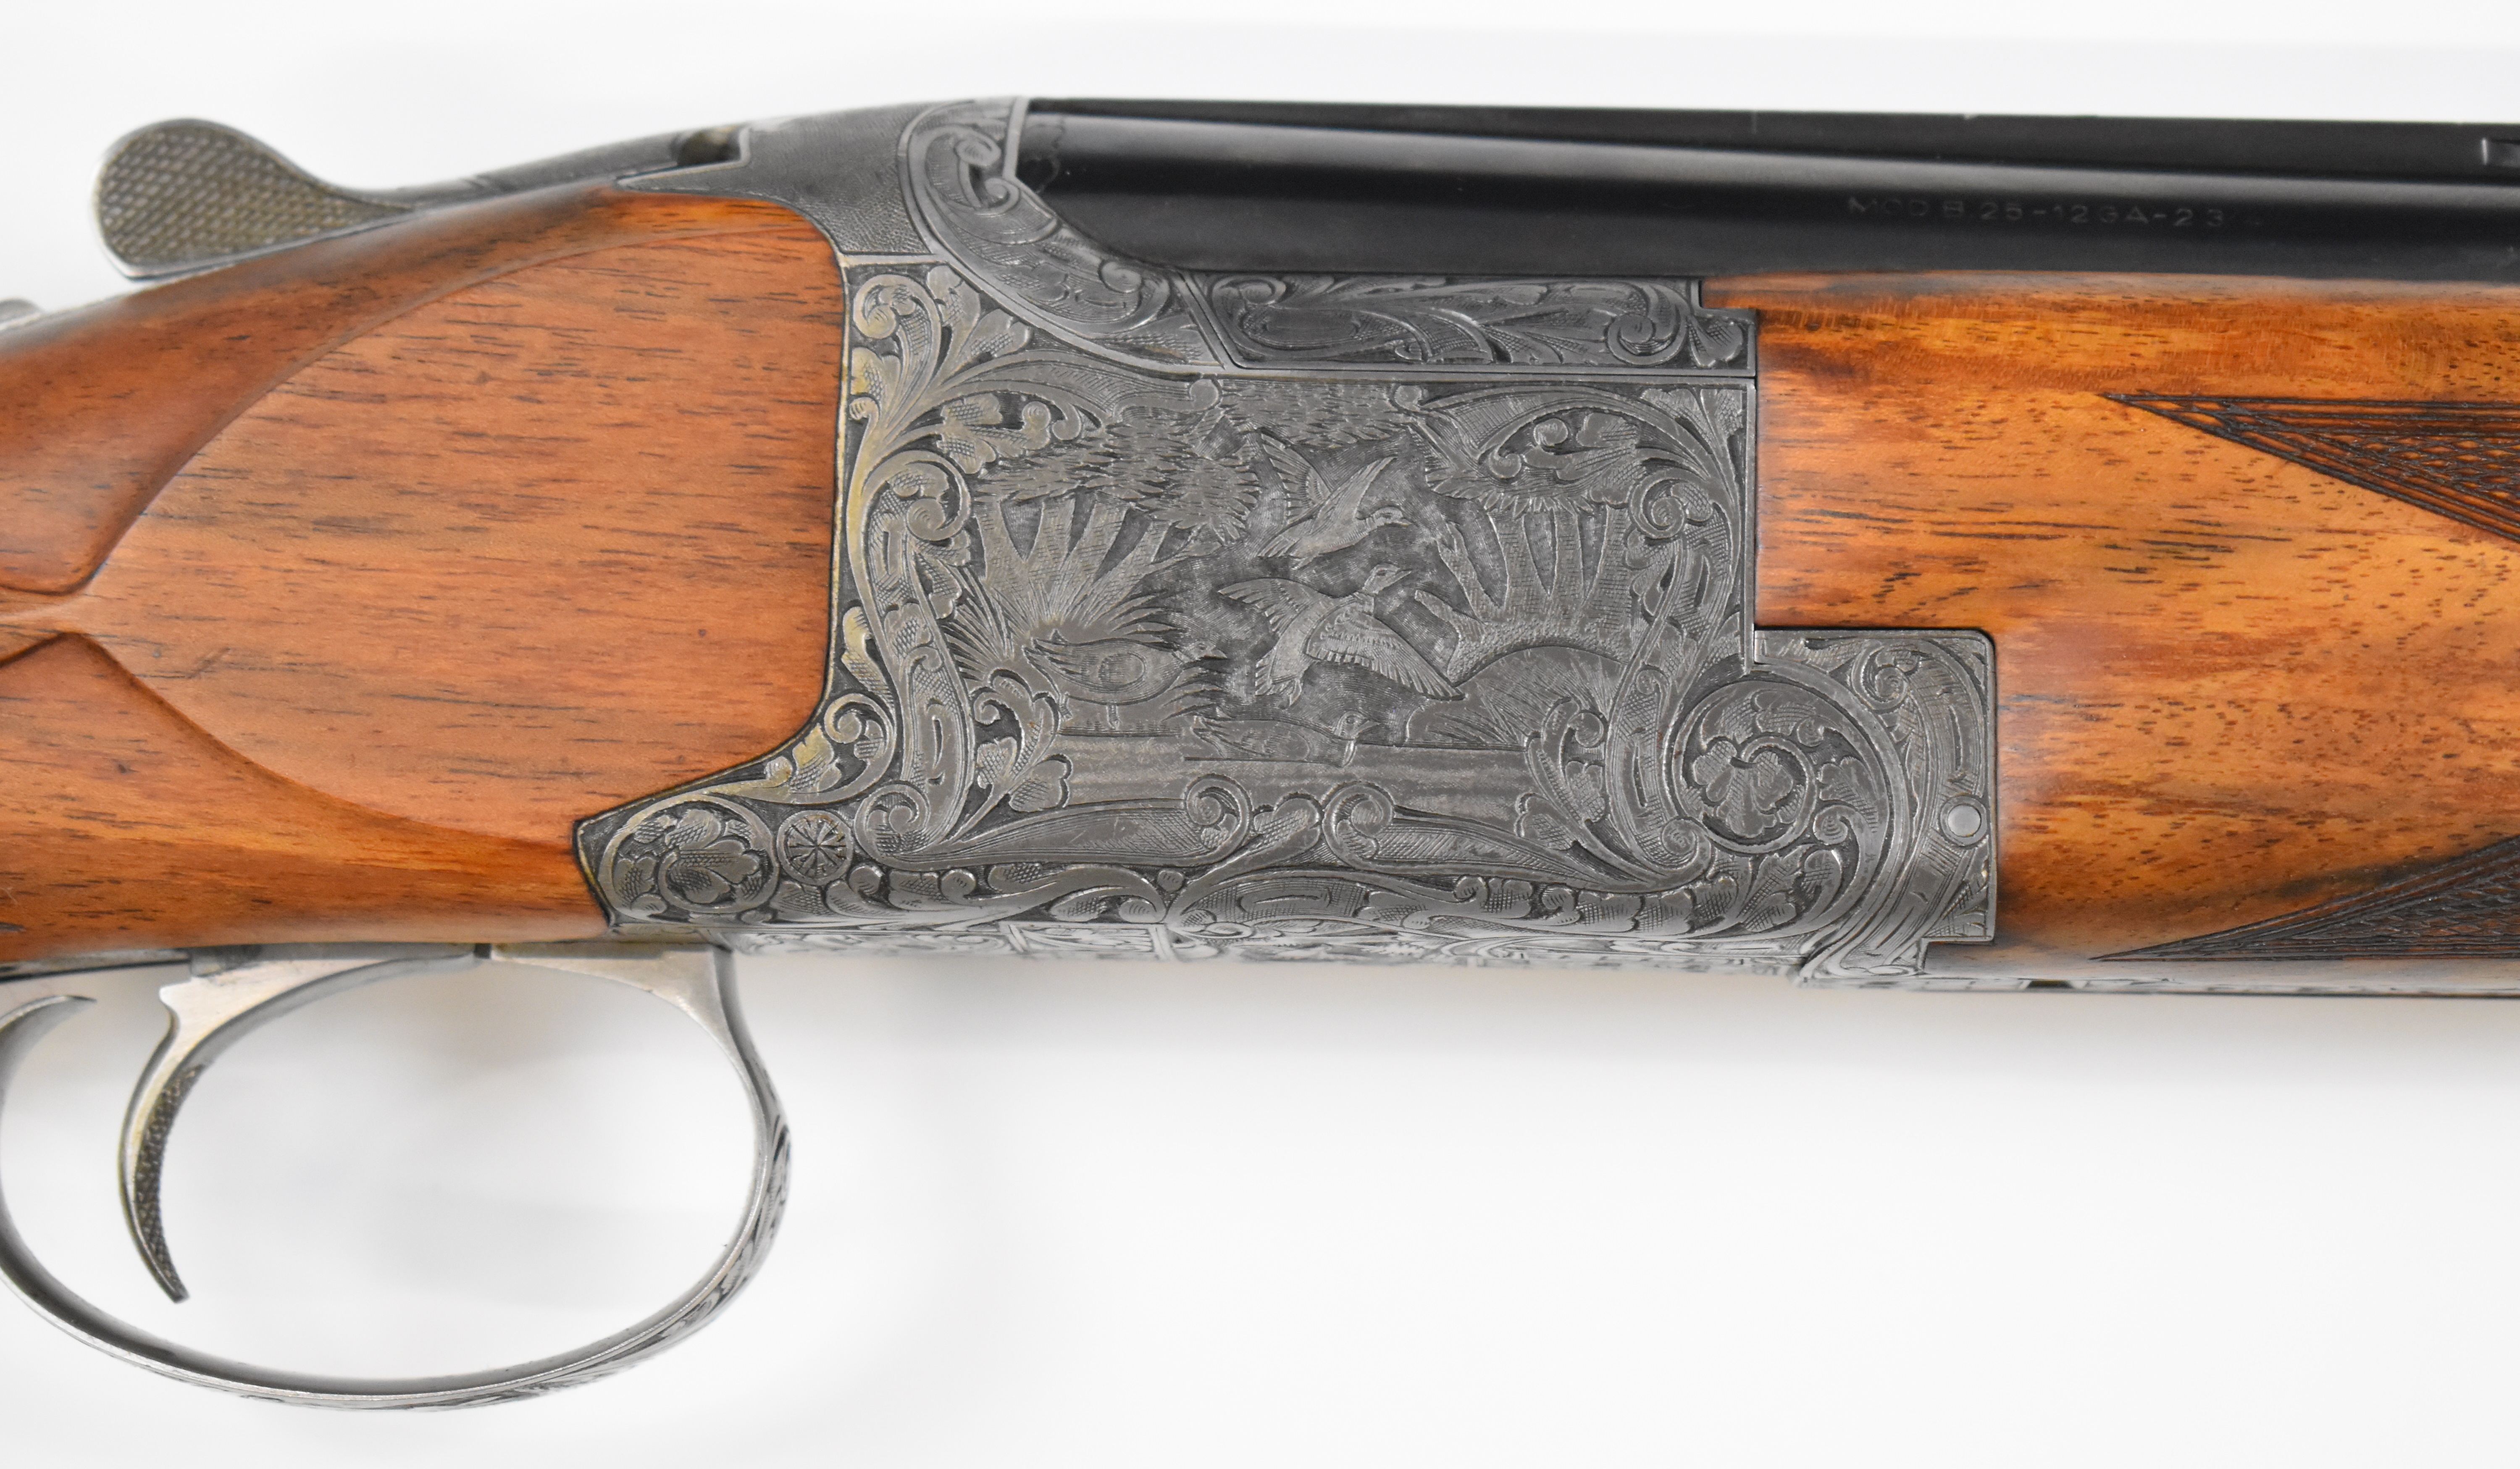 Browning B25 Diana 12 bore over and under ejector shotgun with Pierre Lallemand engraved scenes of - Image 6 of 15